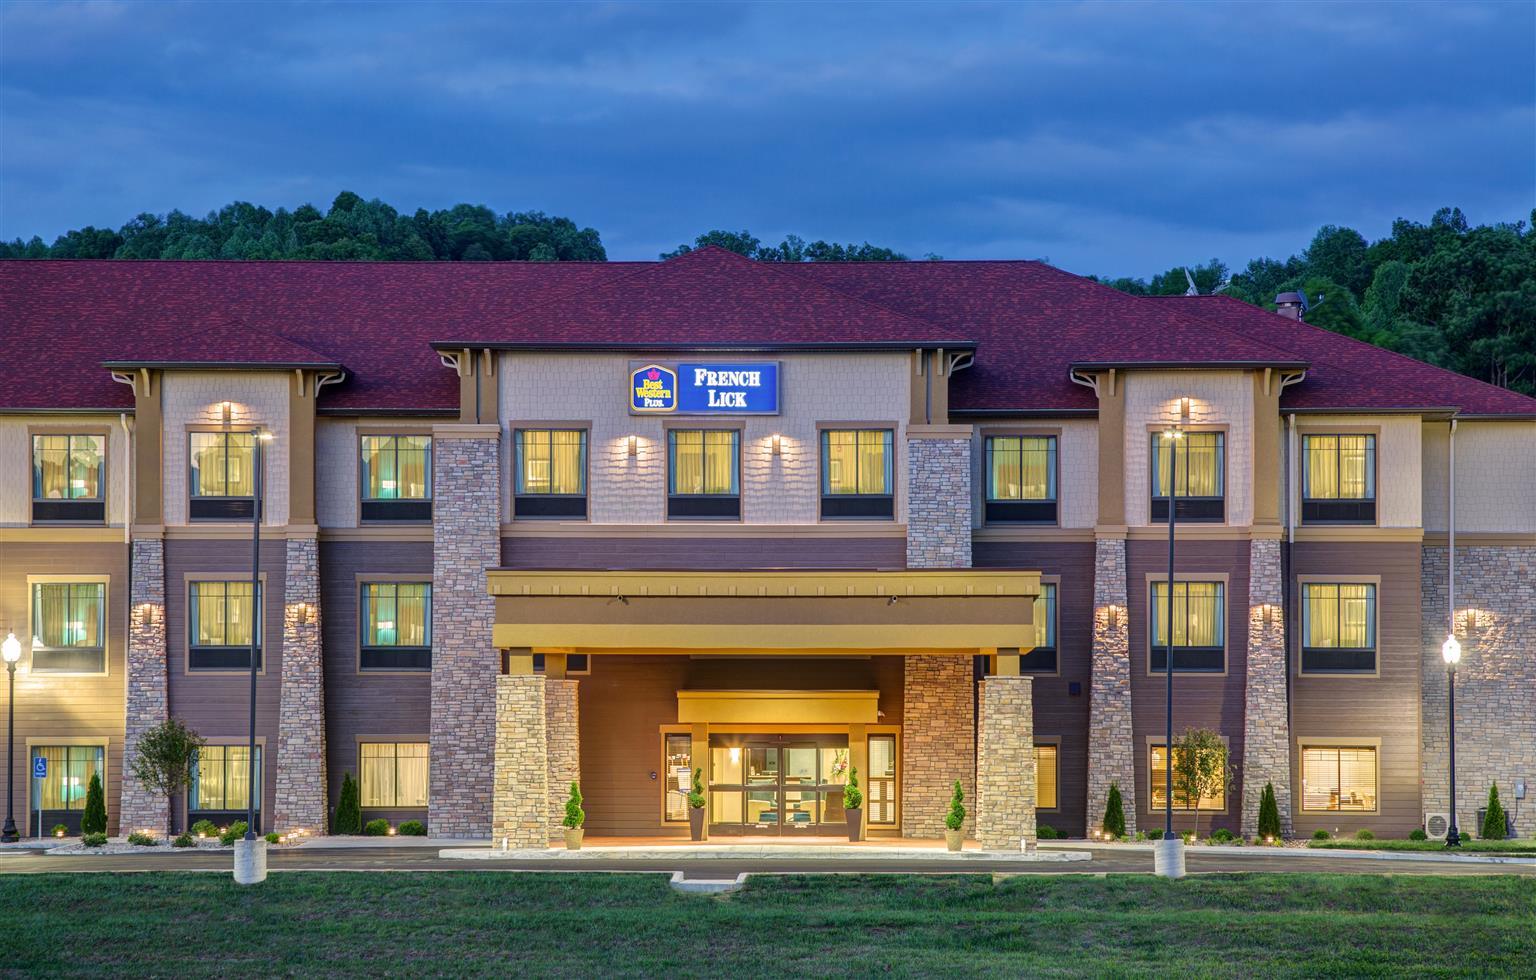 Best Western Plus French Lick Exterior foto